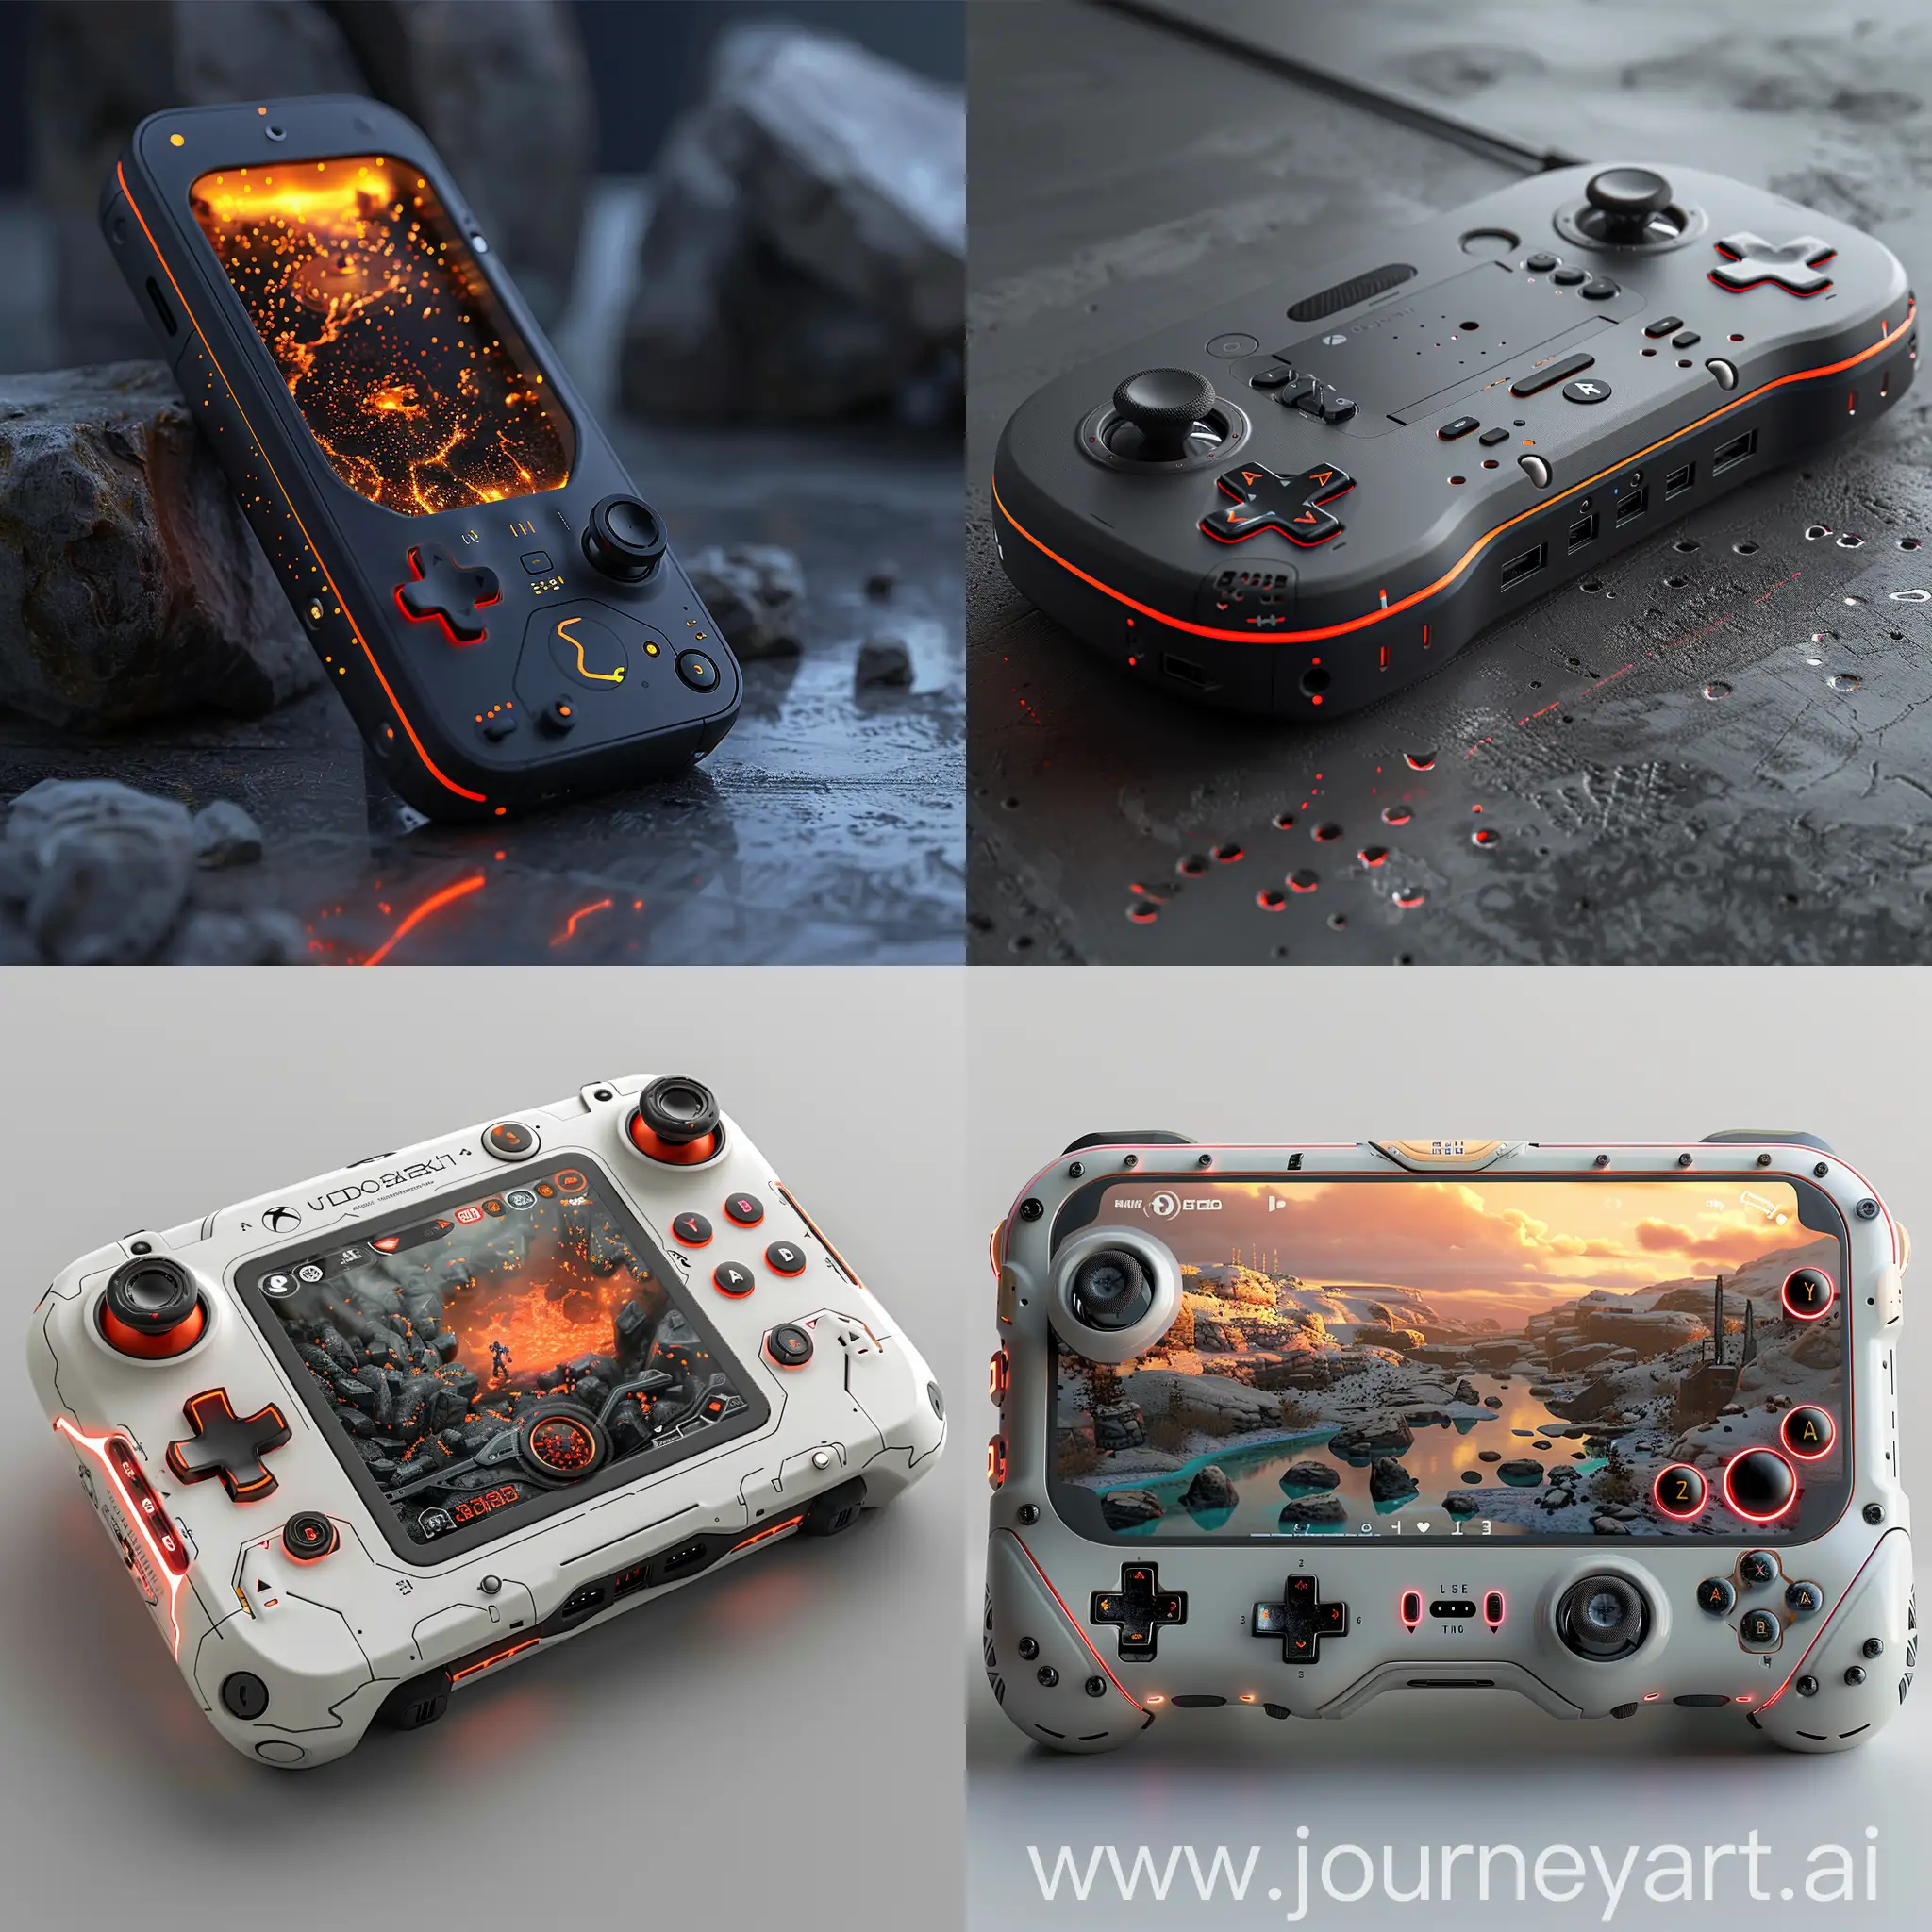 Futuristic portable gaming console, shapeshifting, AR/VR integration, ultra-thin and light, cloud-powered, AI-powered performance, neural haptic feedback, brain-computer interface, environmental simulation, self-charging, social features, cross-reality gaming, octane render --stylize 1000